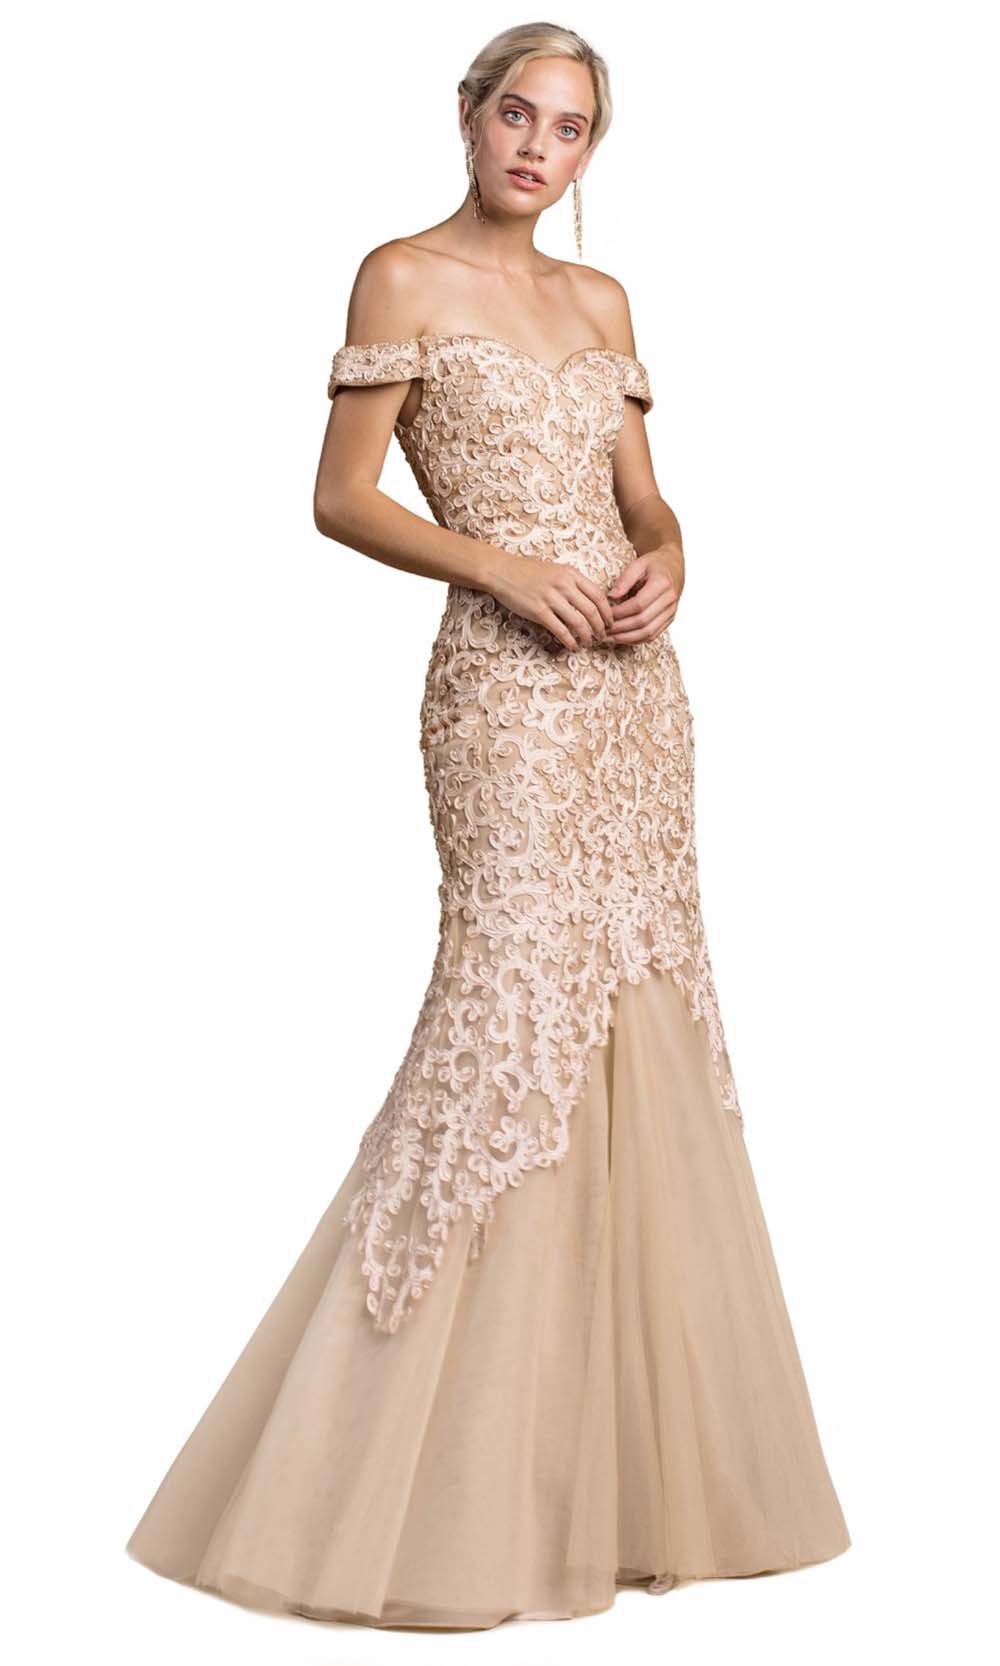 Cinderella Divine - A0401 Lace Overlay Mermaid Gown In Champagne & Gold